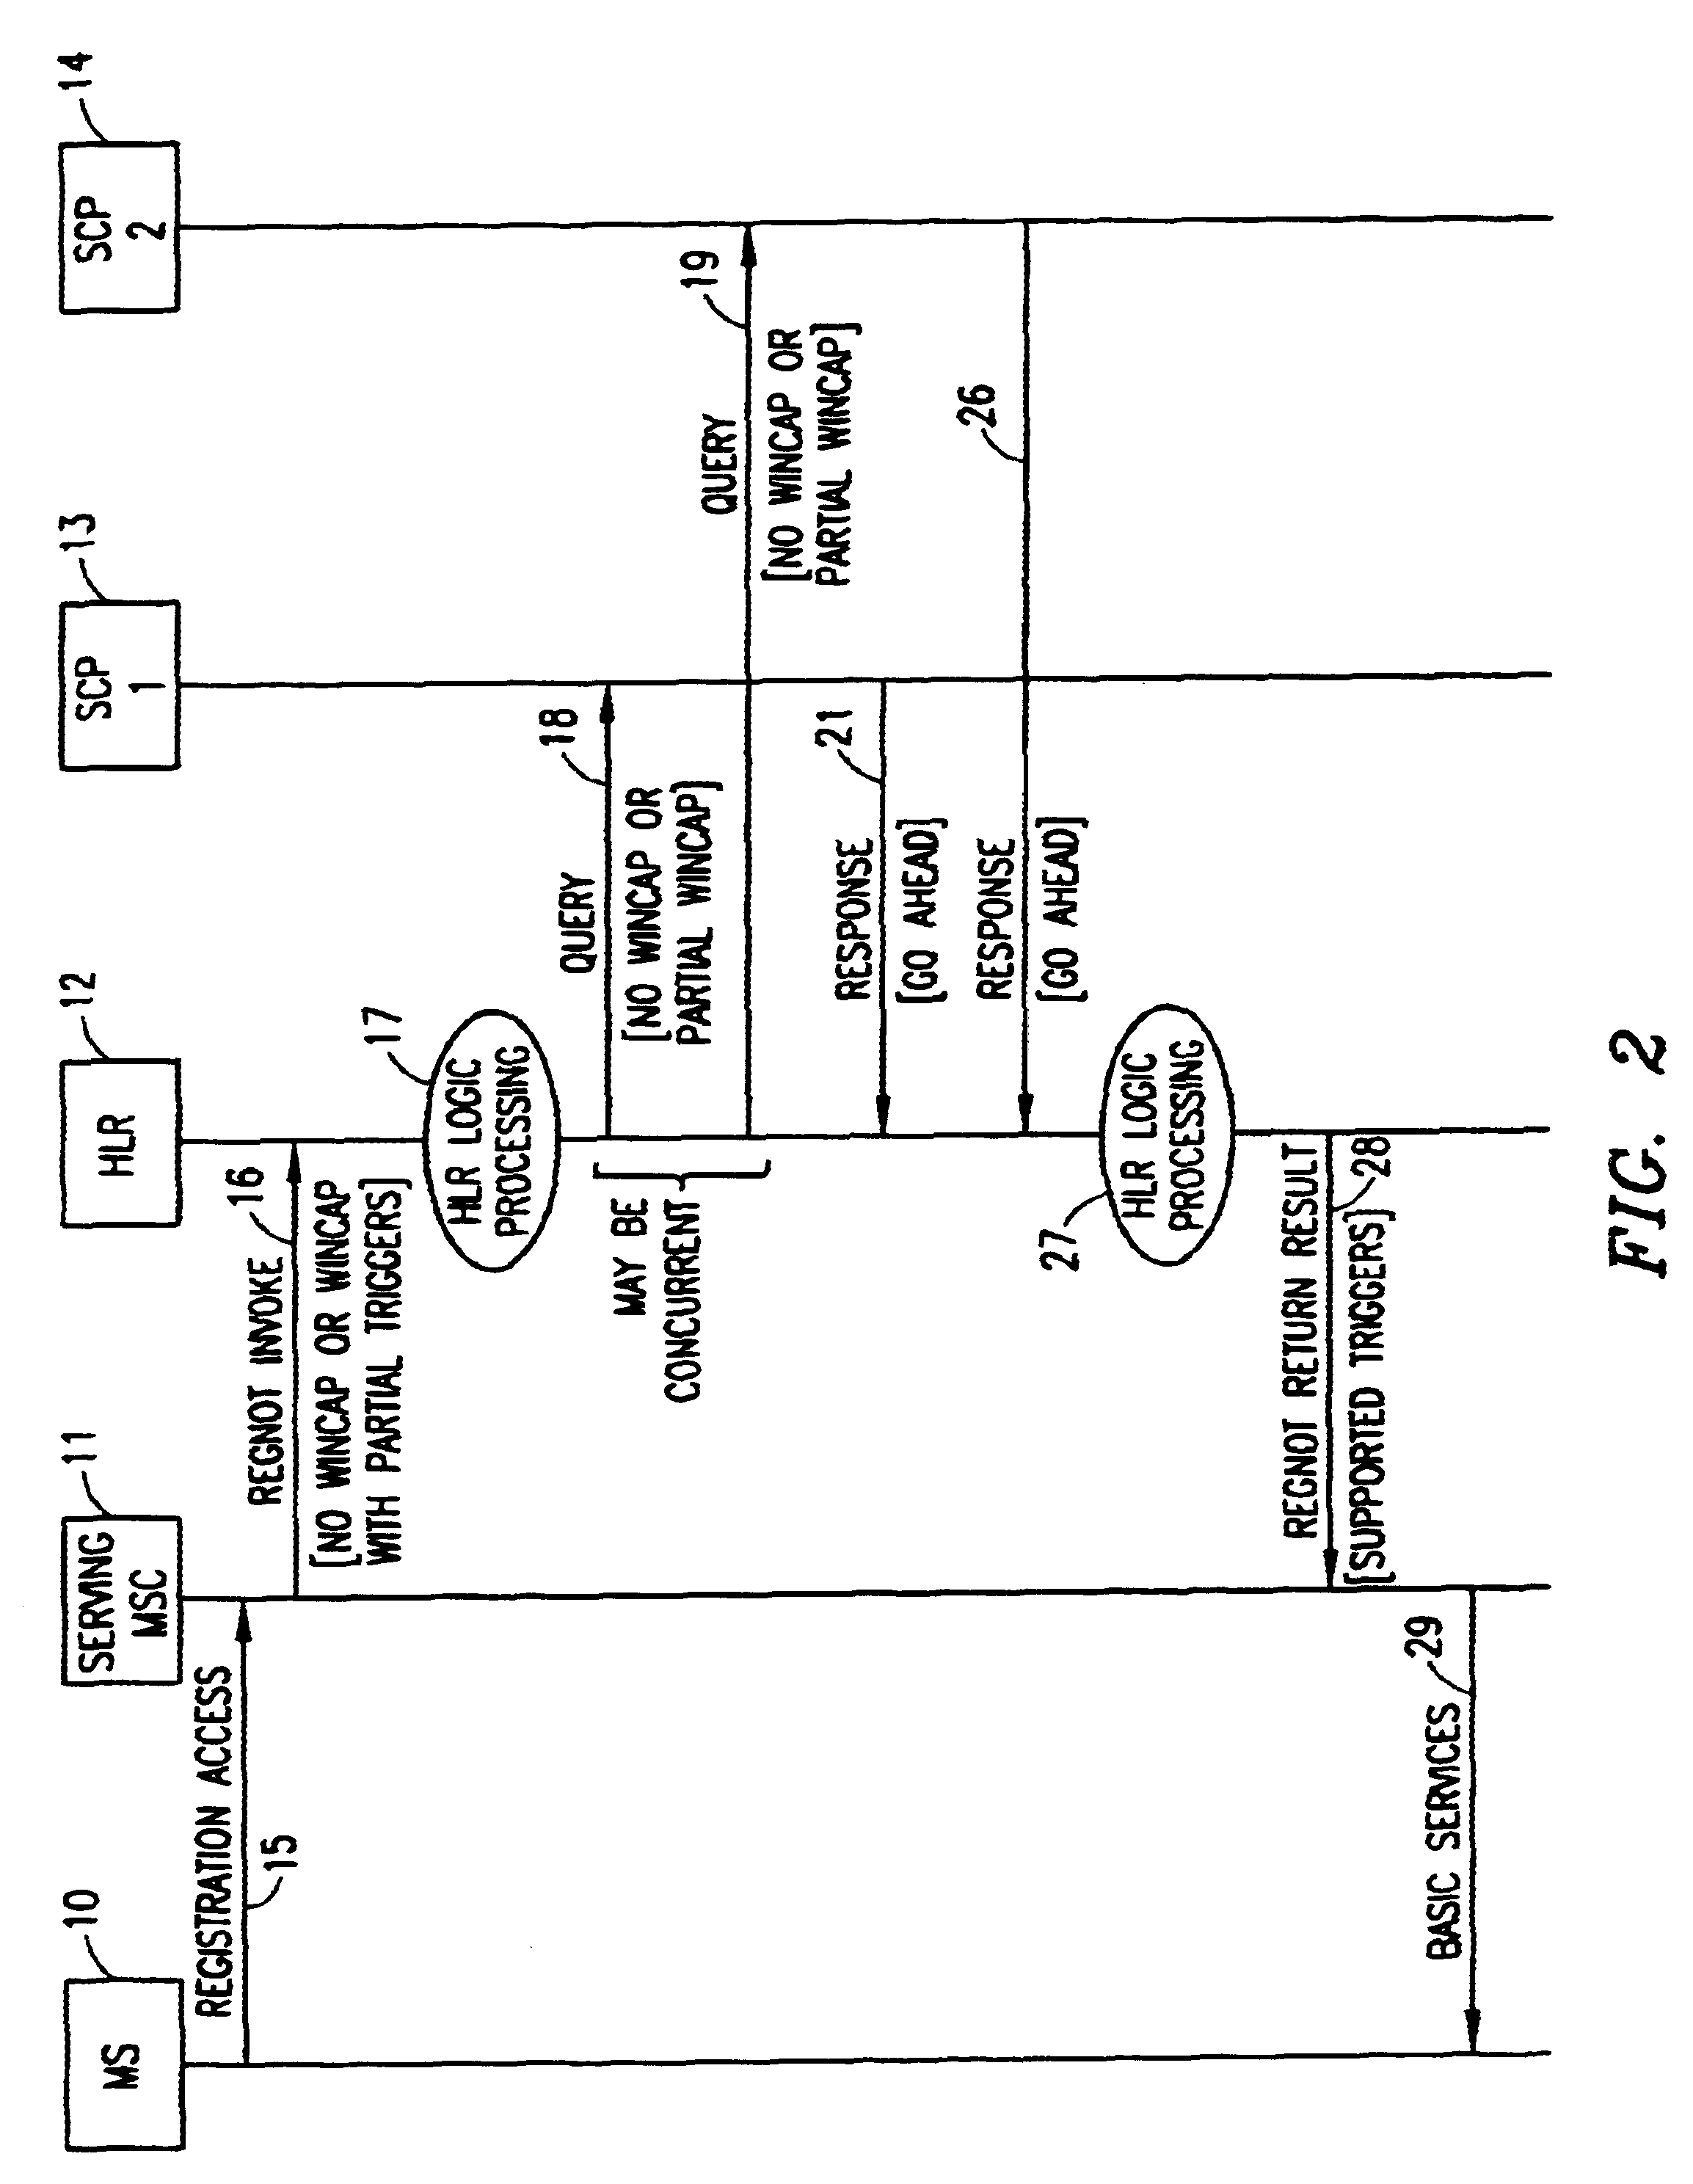 Method of handling subscriber services in a wireless intelligent network